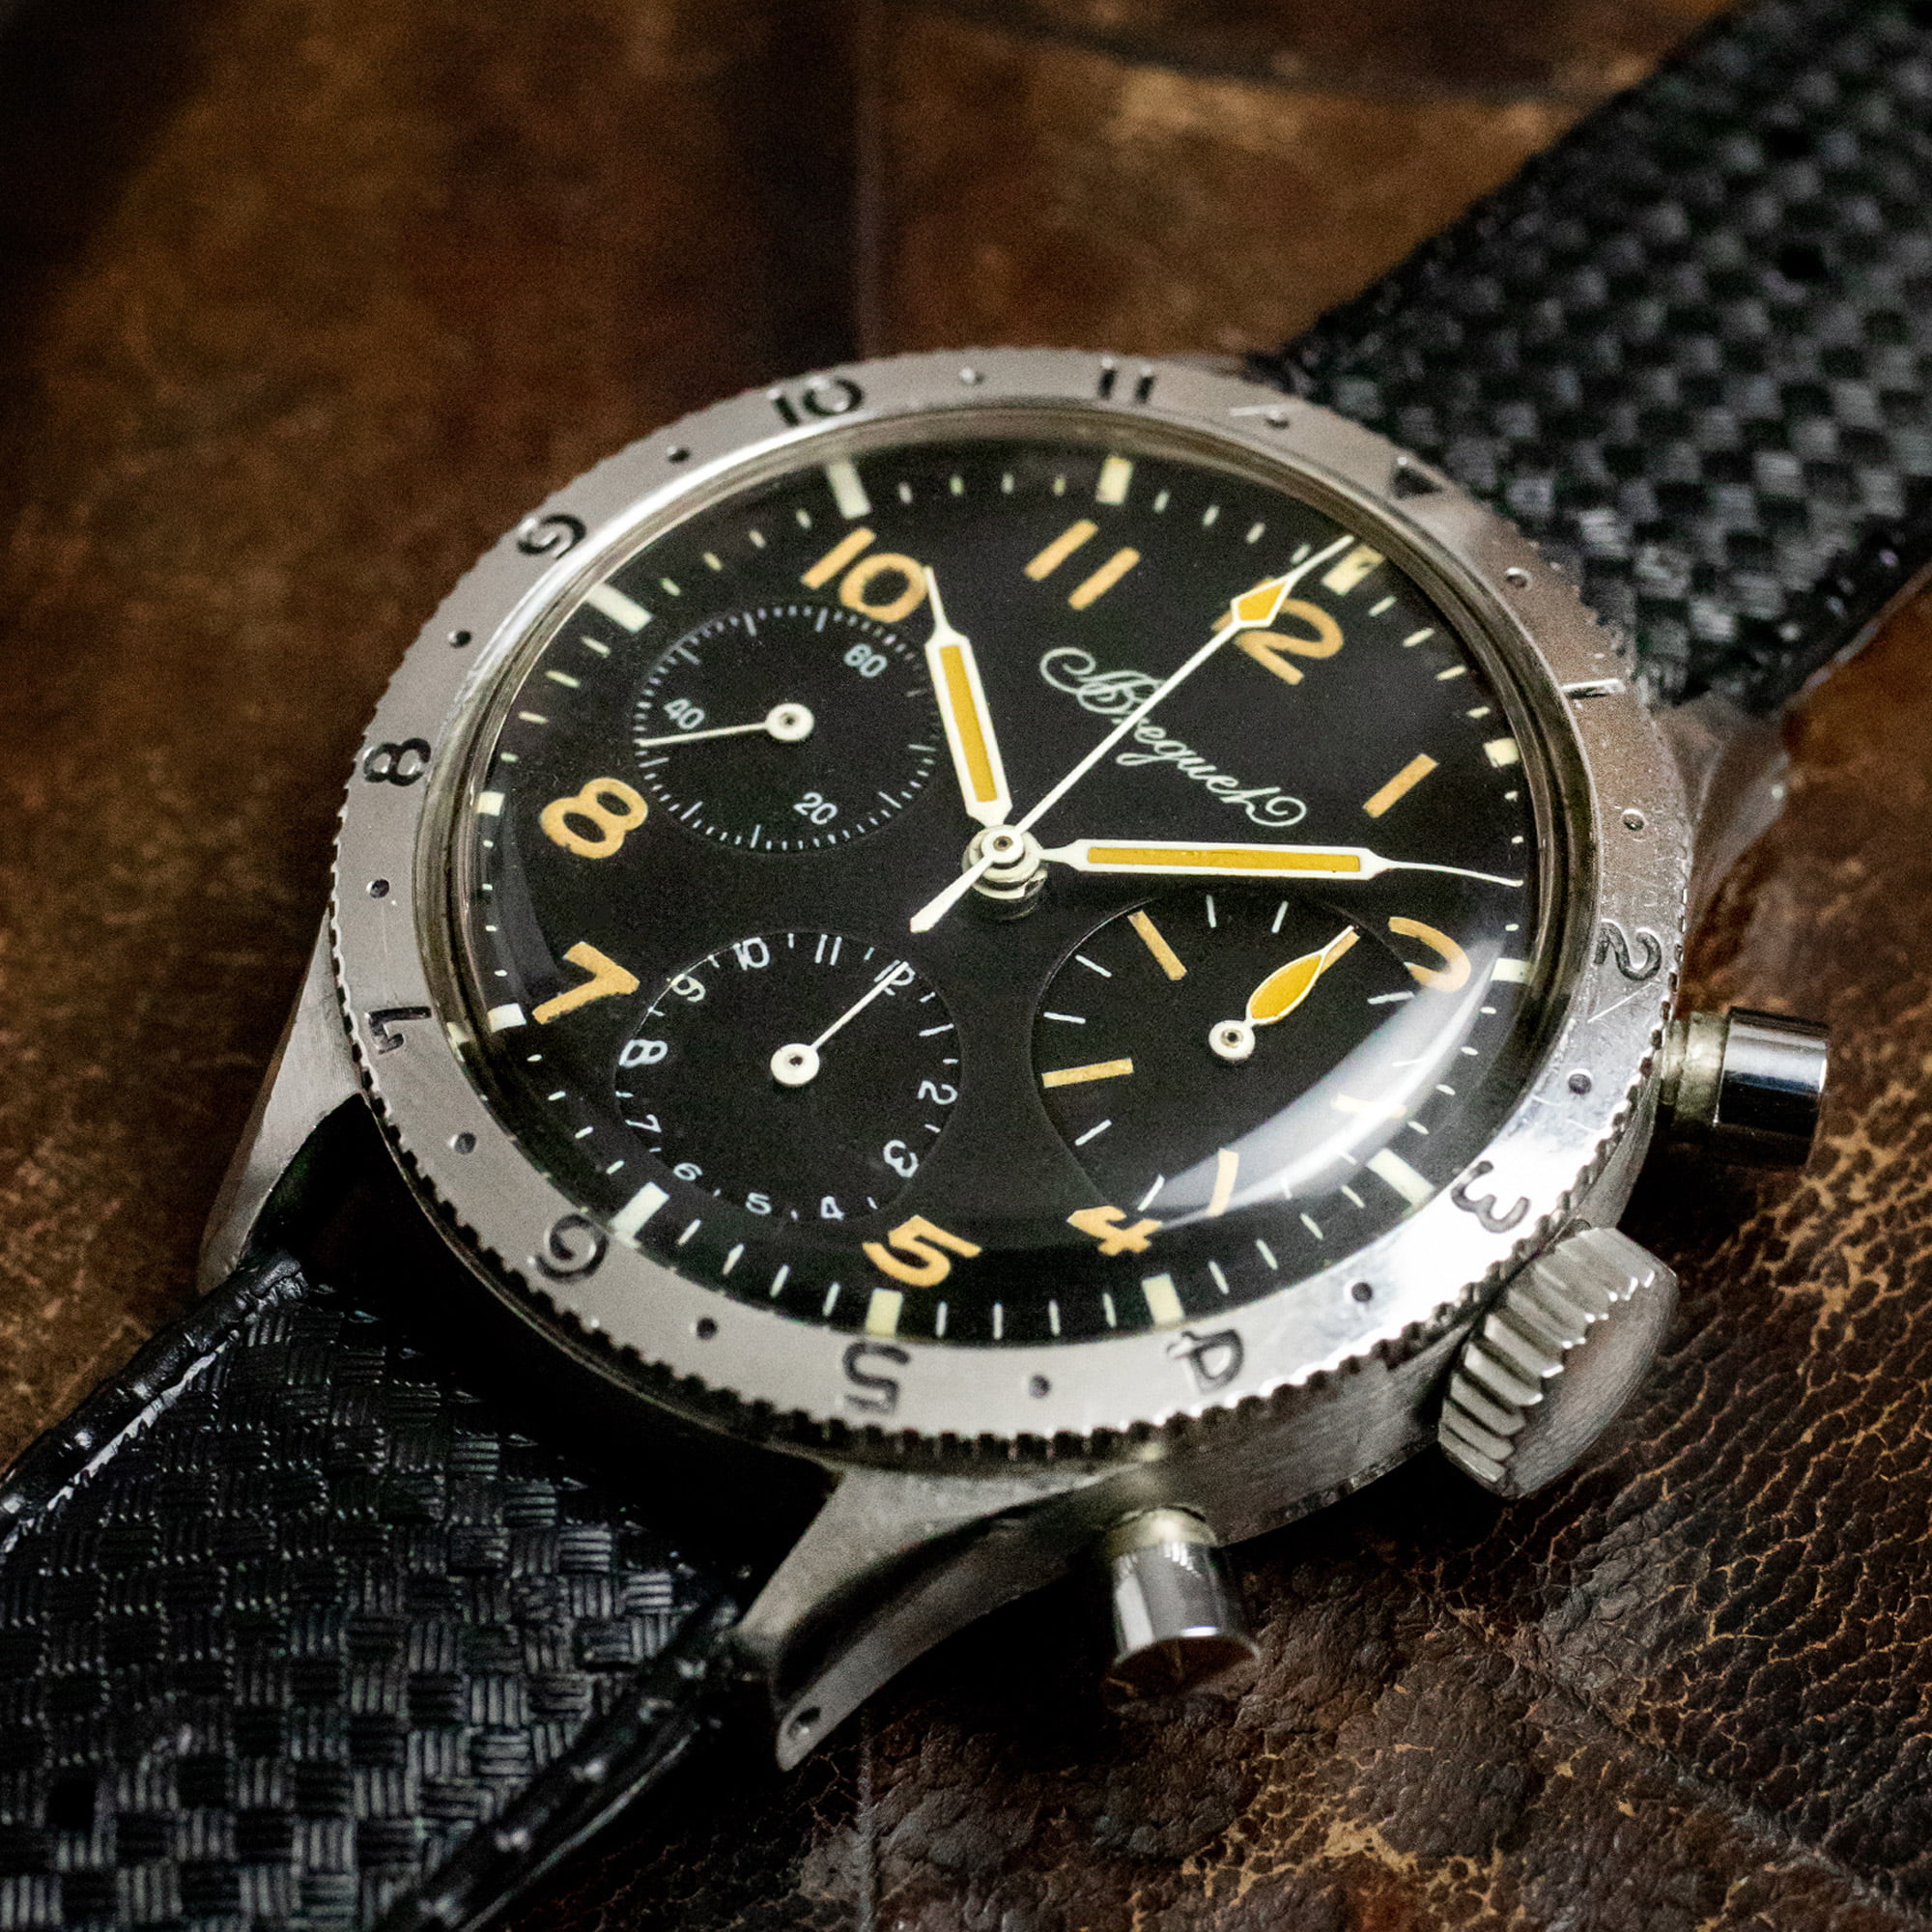 Breguet Type XX vintage watches aren't as fragile as you may think